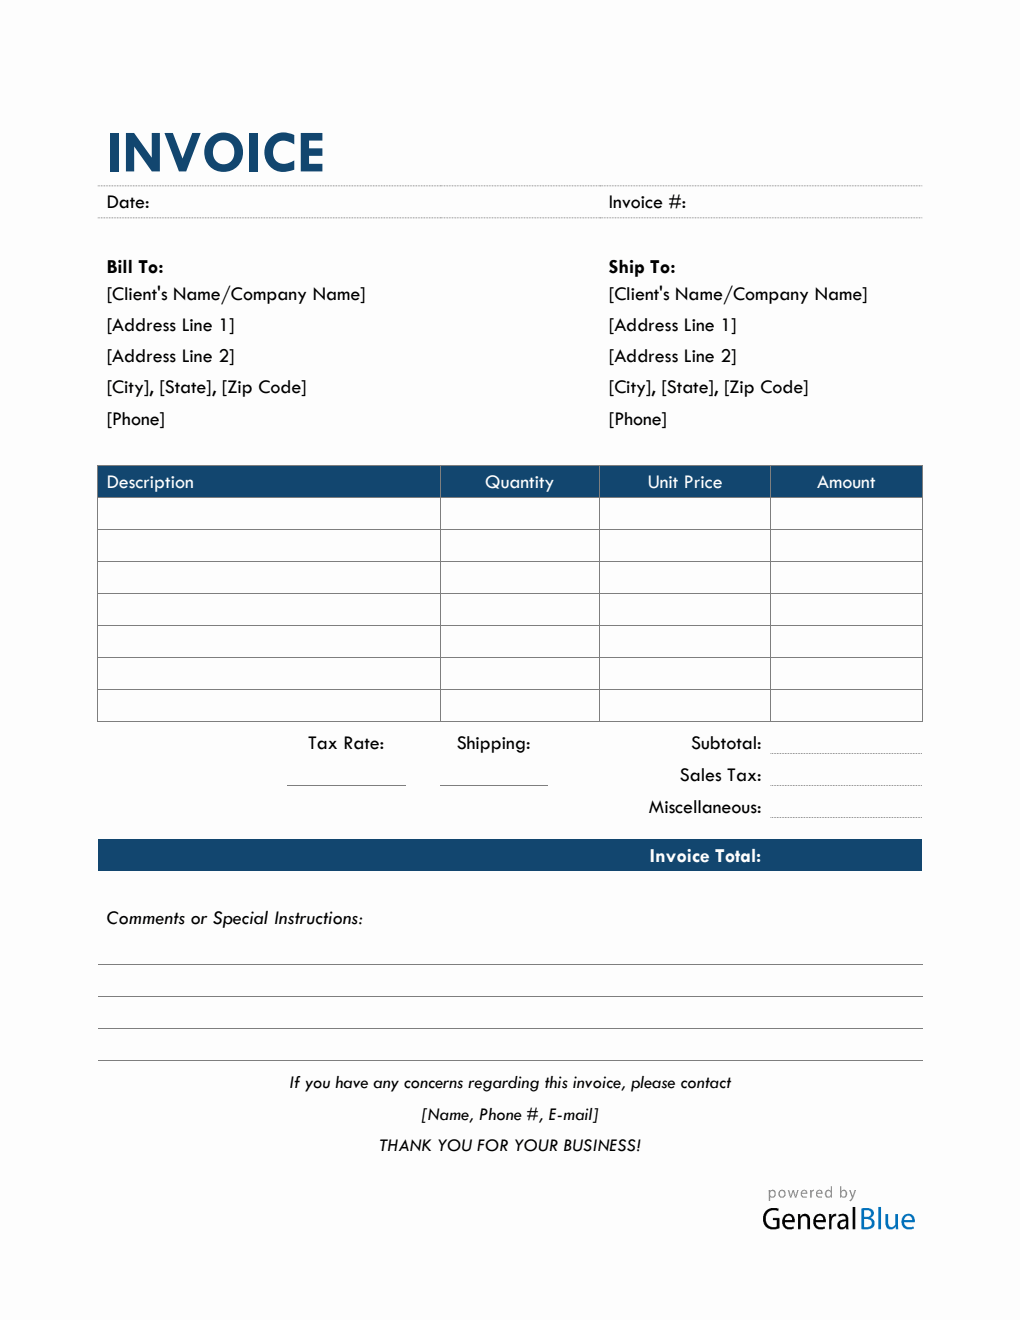 Bill Of Sale Invoice in Word (Colorful)